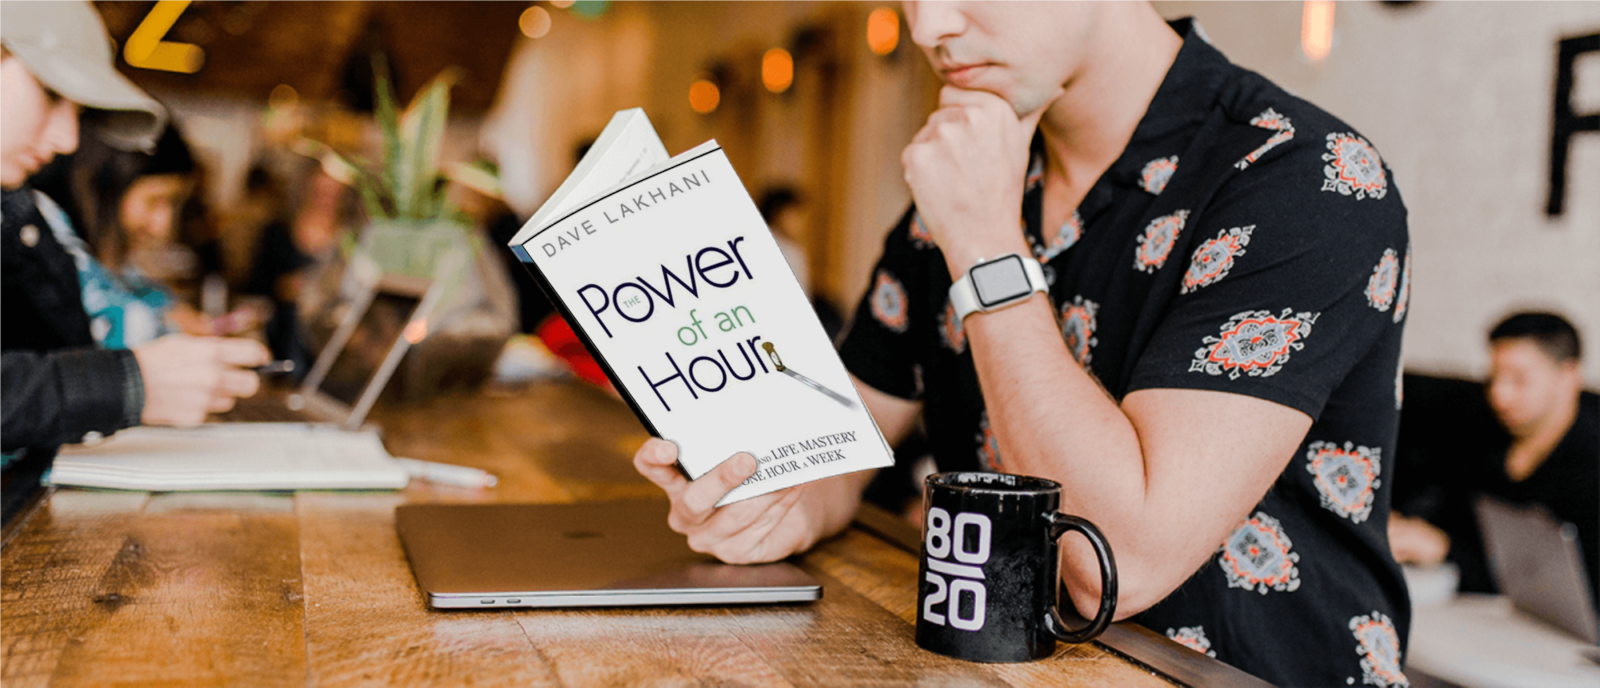 The power of an hour mockup